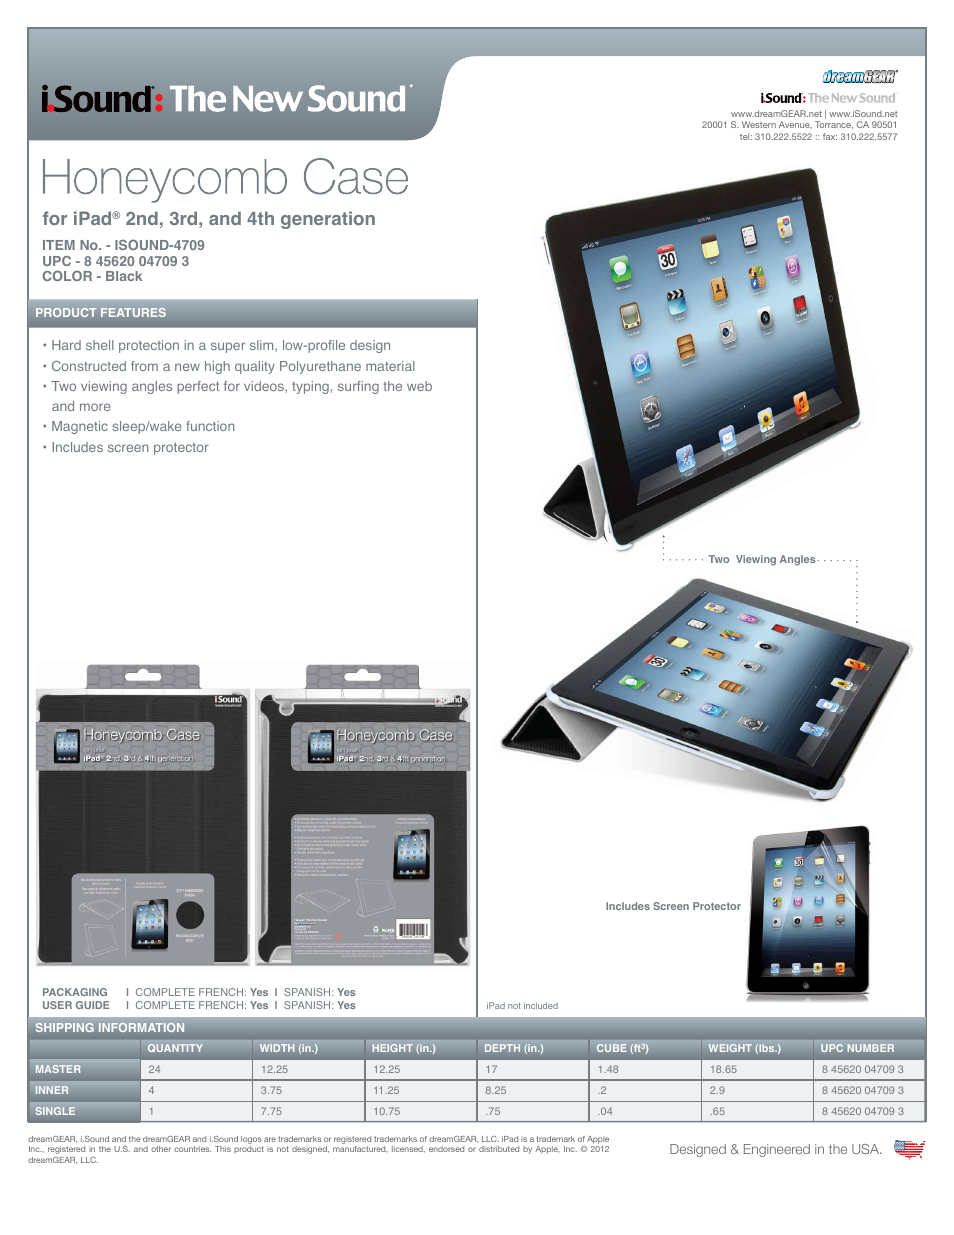 Honeycomb Case for iPad2nd, 3rd, and 4th generation - Sell Sheet